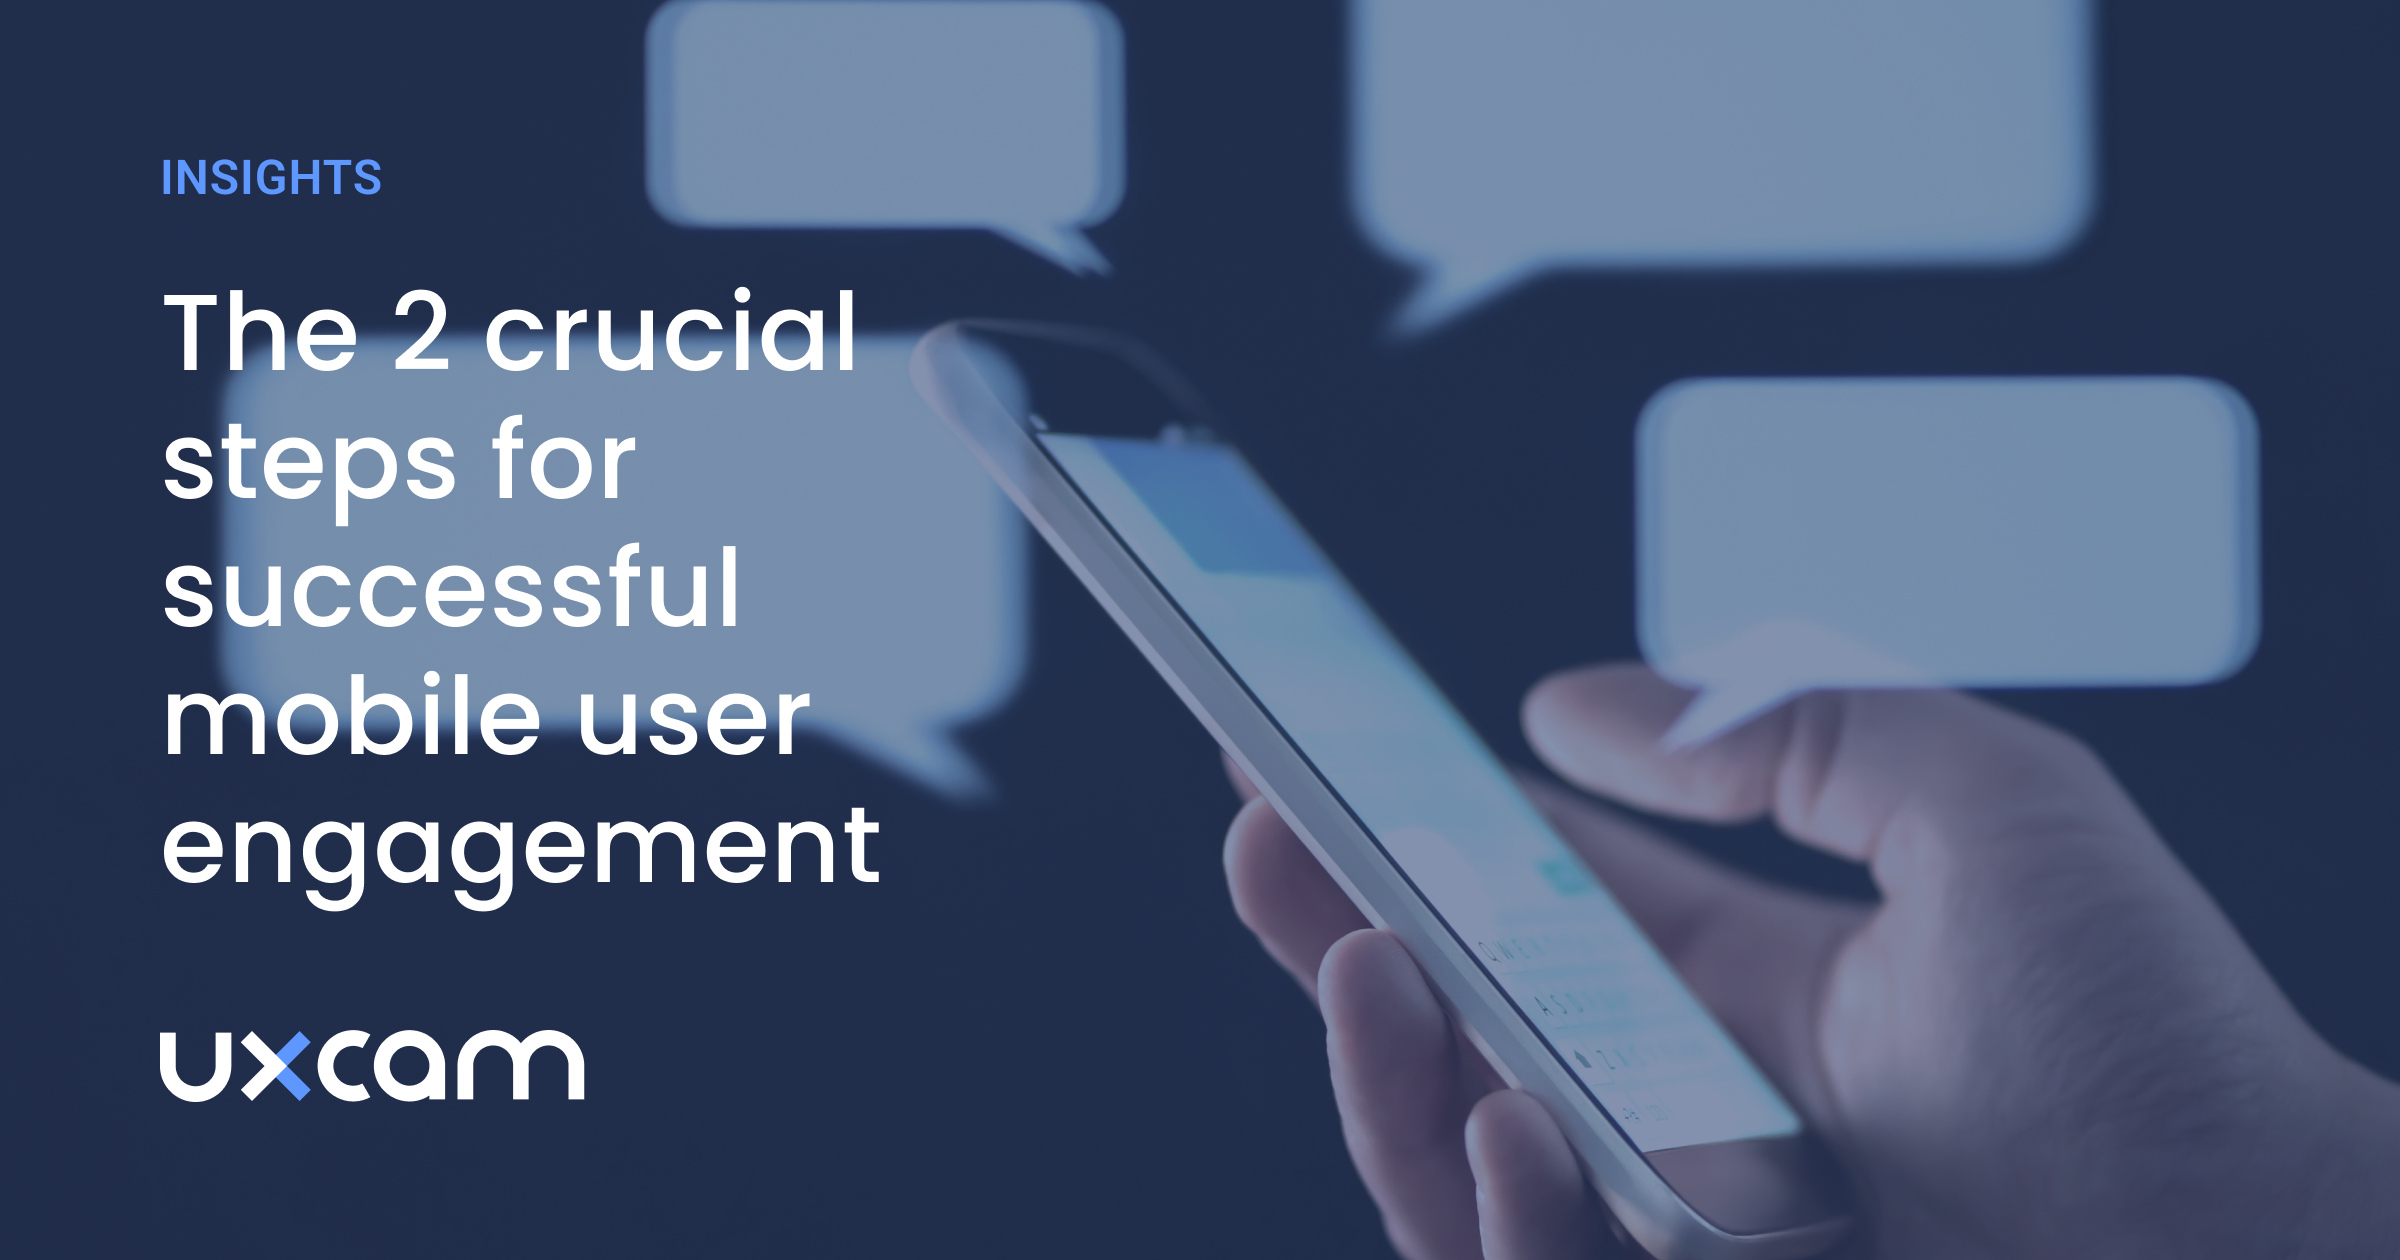 The 2 crucial steps for successful mobile user engagement